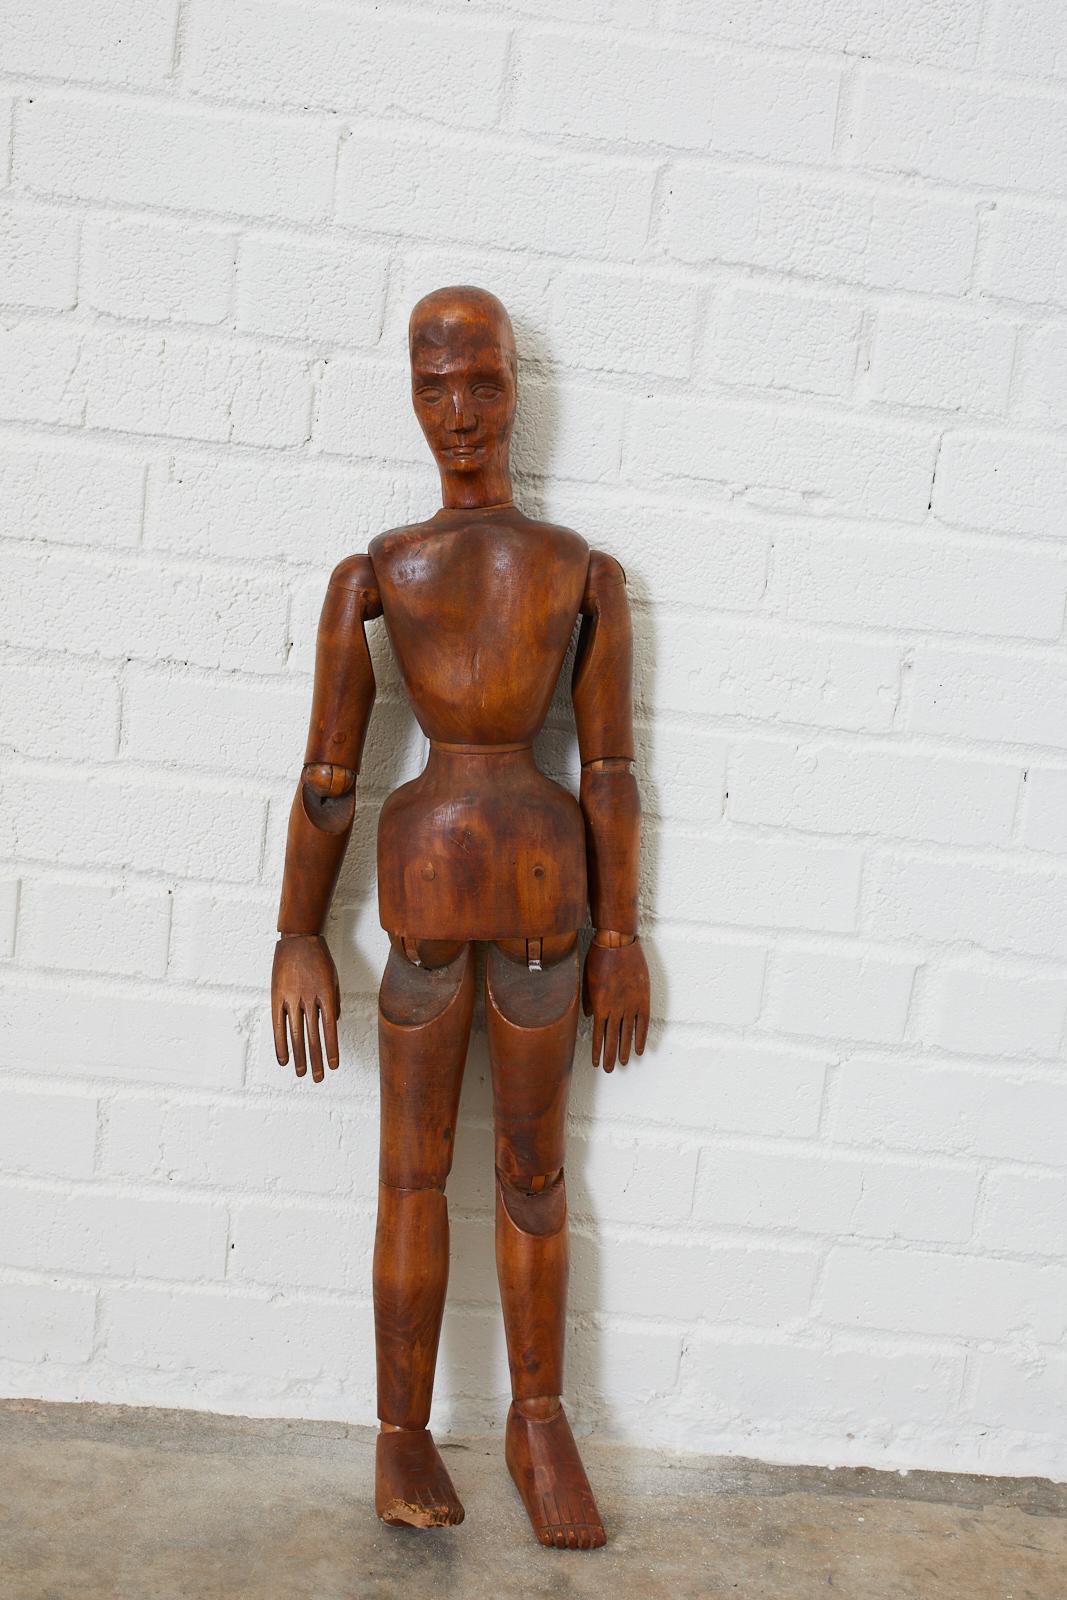 Large 19th century French artists mannequin handcrafted from beechwood. Features articulated joints and wood peg joinery. Beautifully carved face and intricate features. Lovely aged patina on the wood.